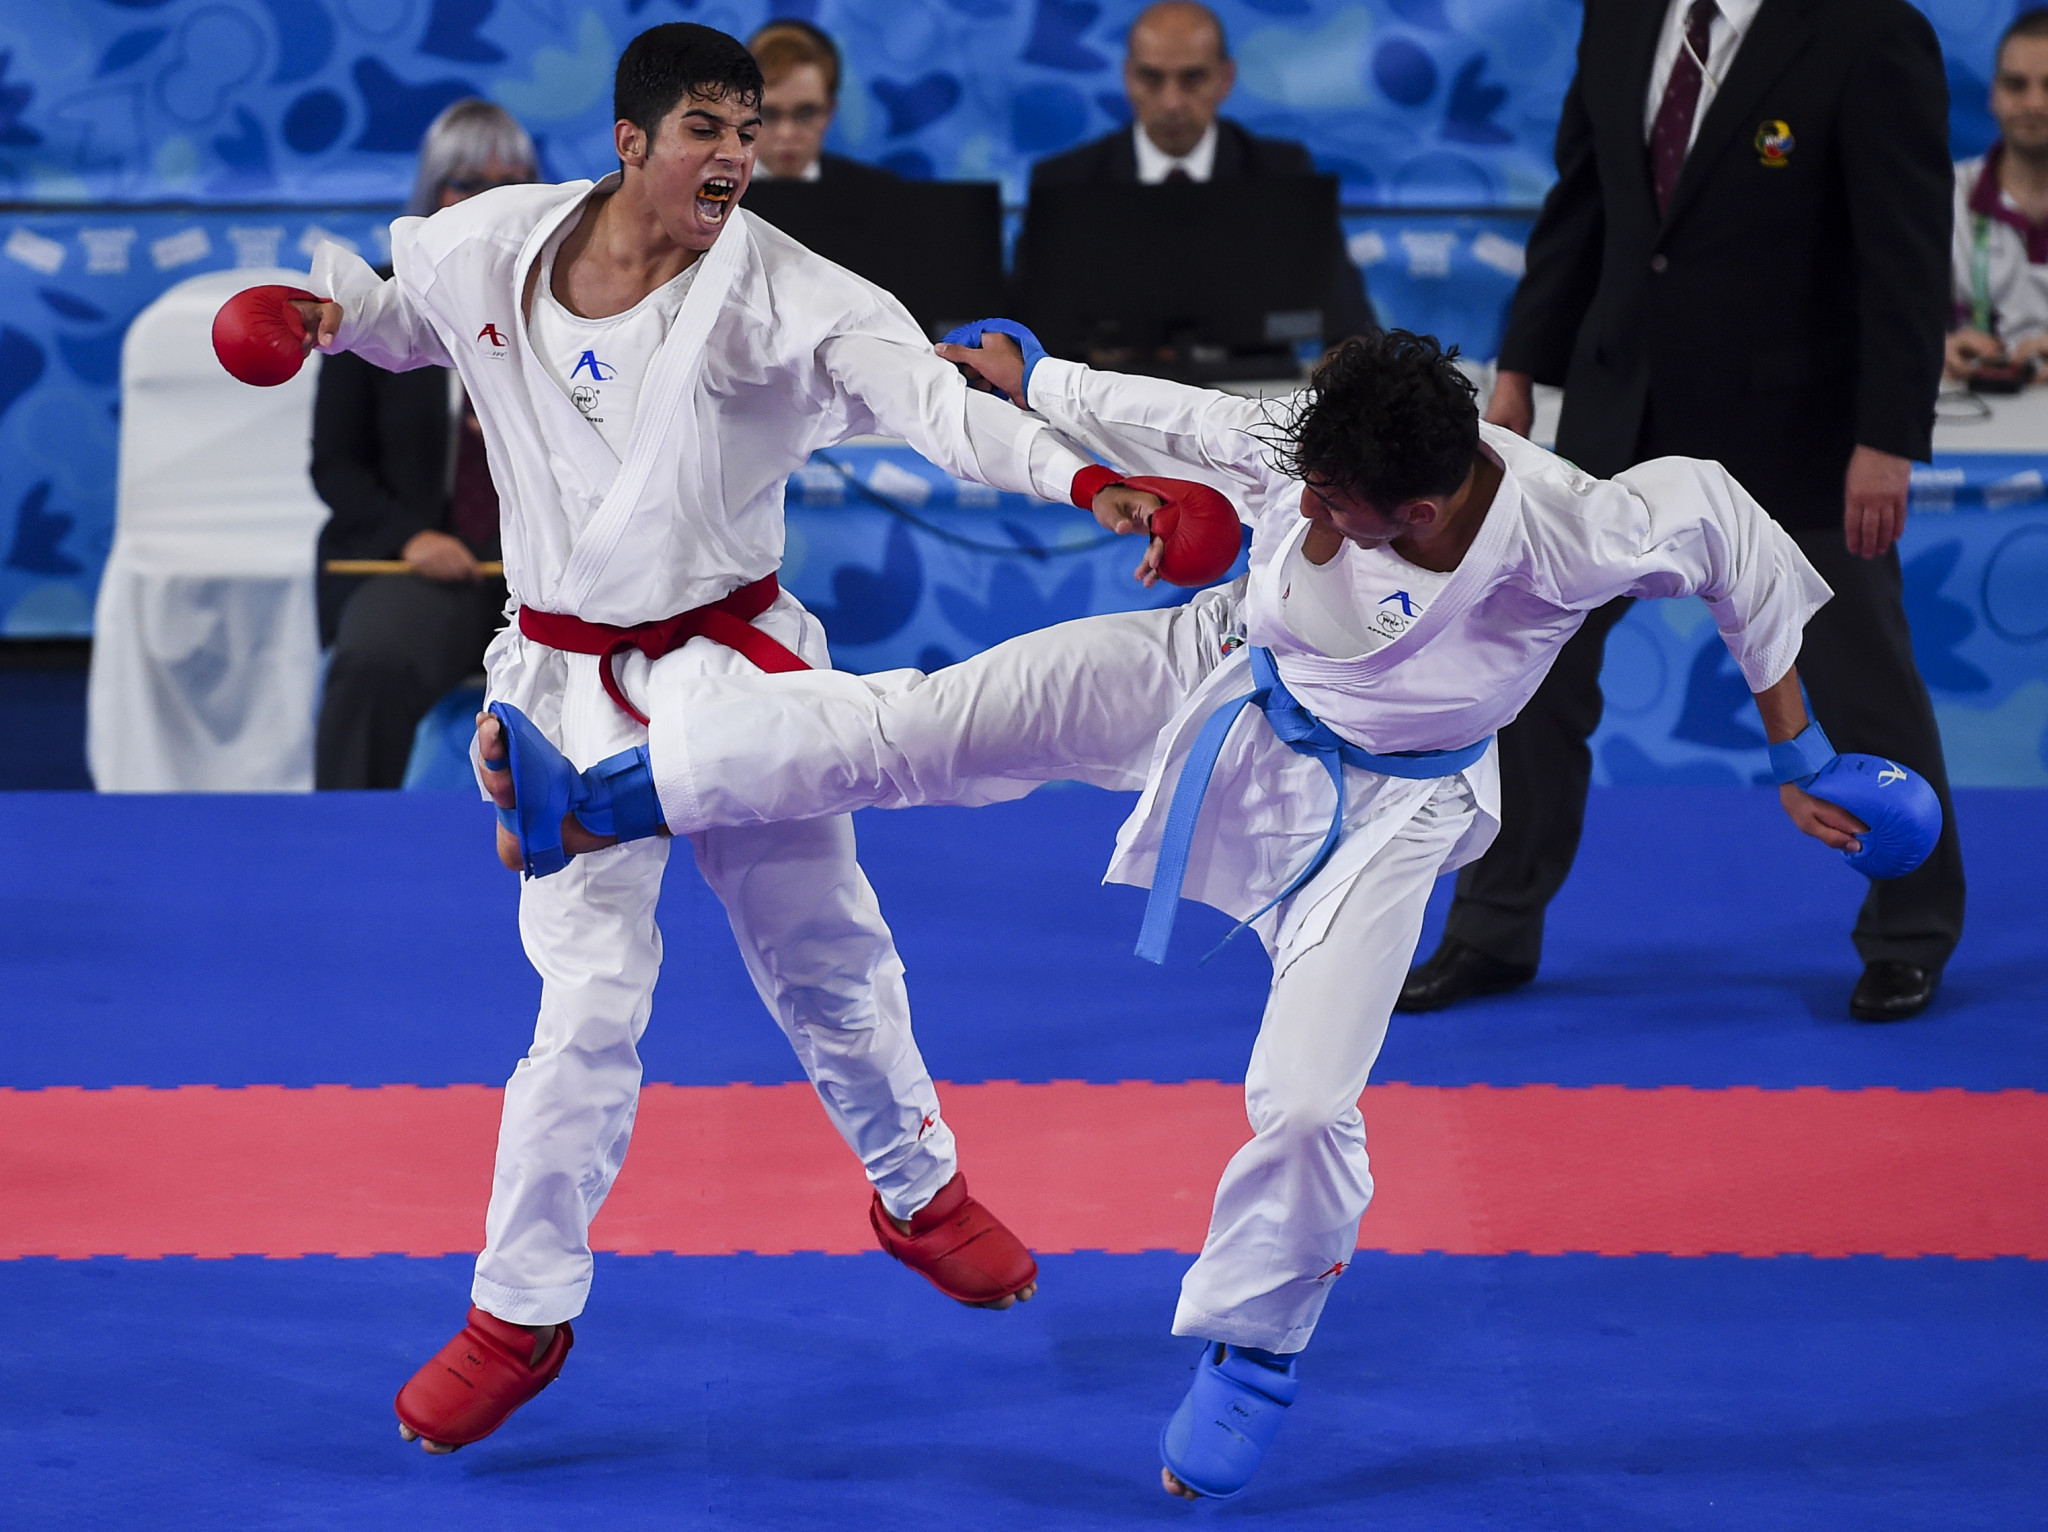 Navid Mohammadi beat Morocco's Nabil Ech-Chaabi in the boys' over-68kg final at the Buenos Aires 2018 Summer Youth Olympic Games ©Getty Images